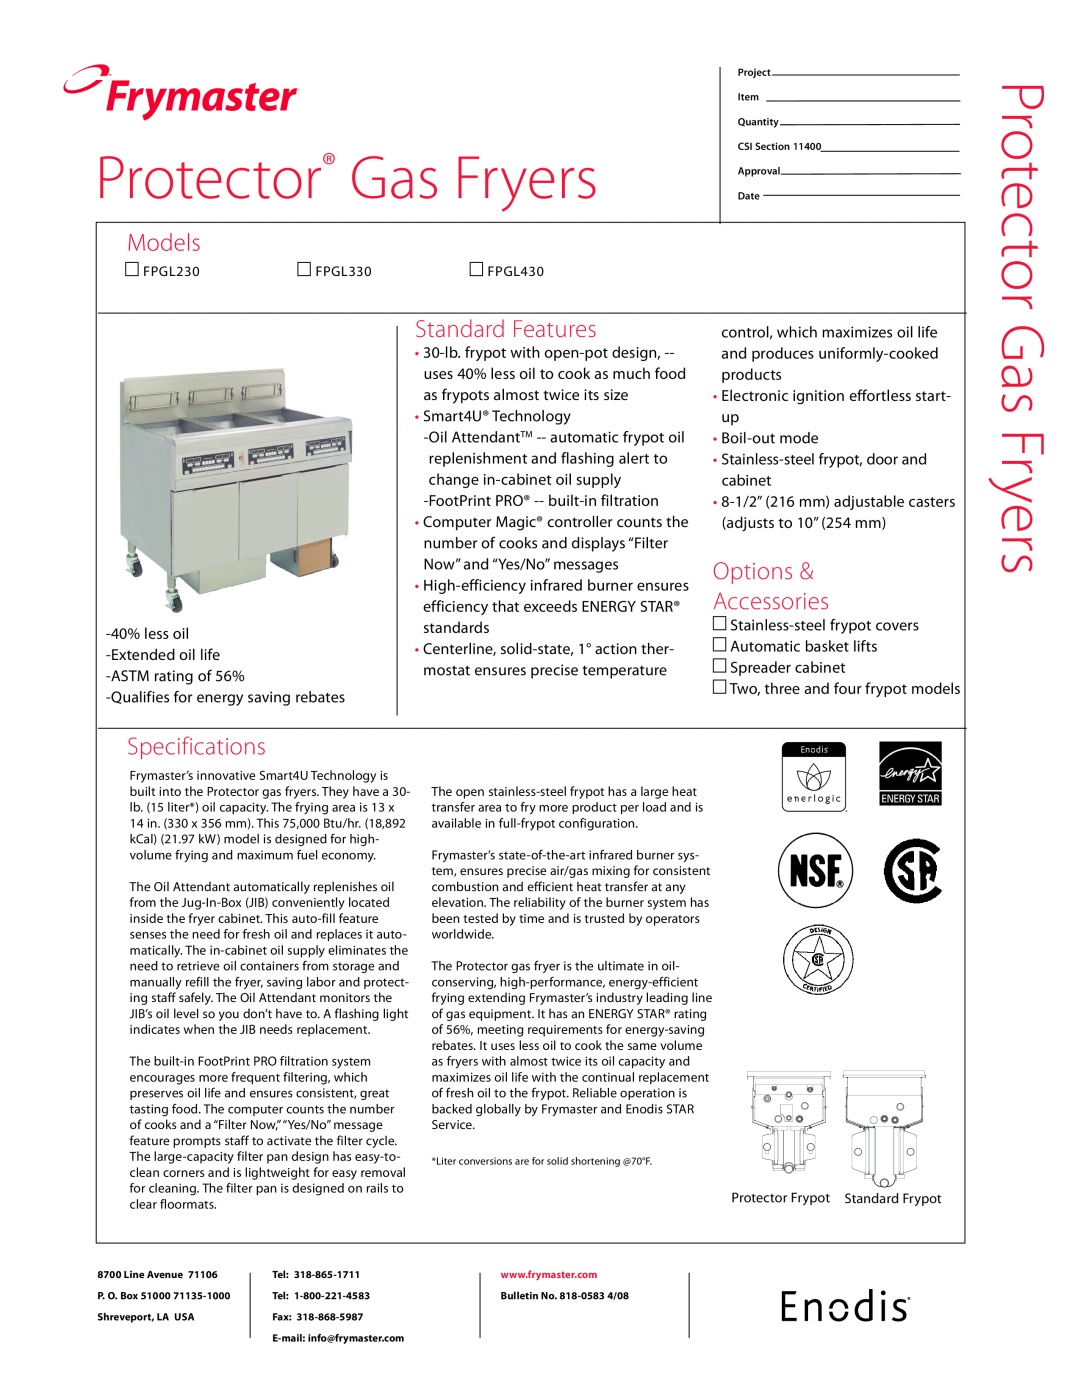 Frymaster FPGL430 specifications 40% less oil Extended oil life ASTM rating of 56%, Qualifies for energy saving rebates 